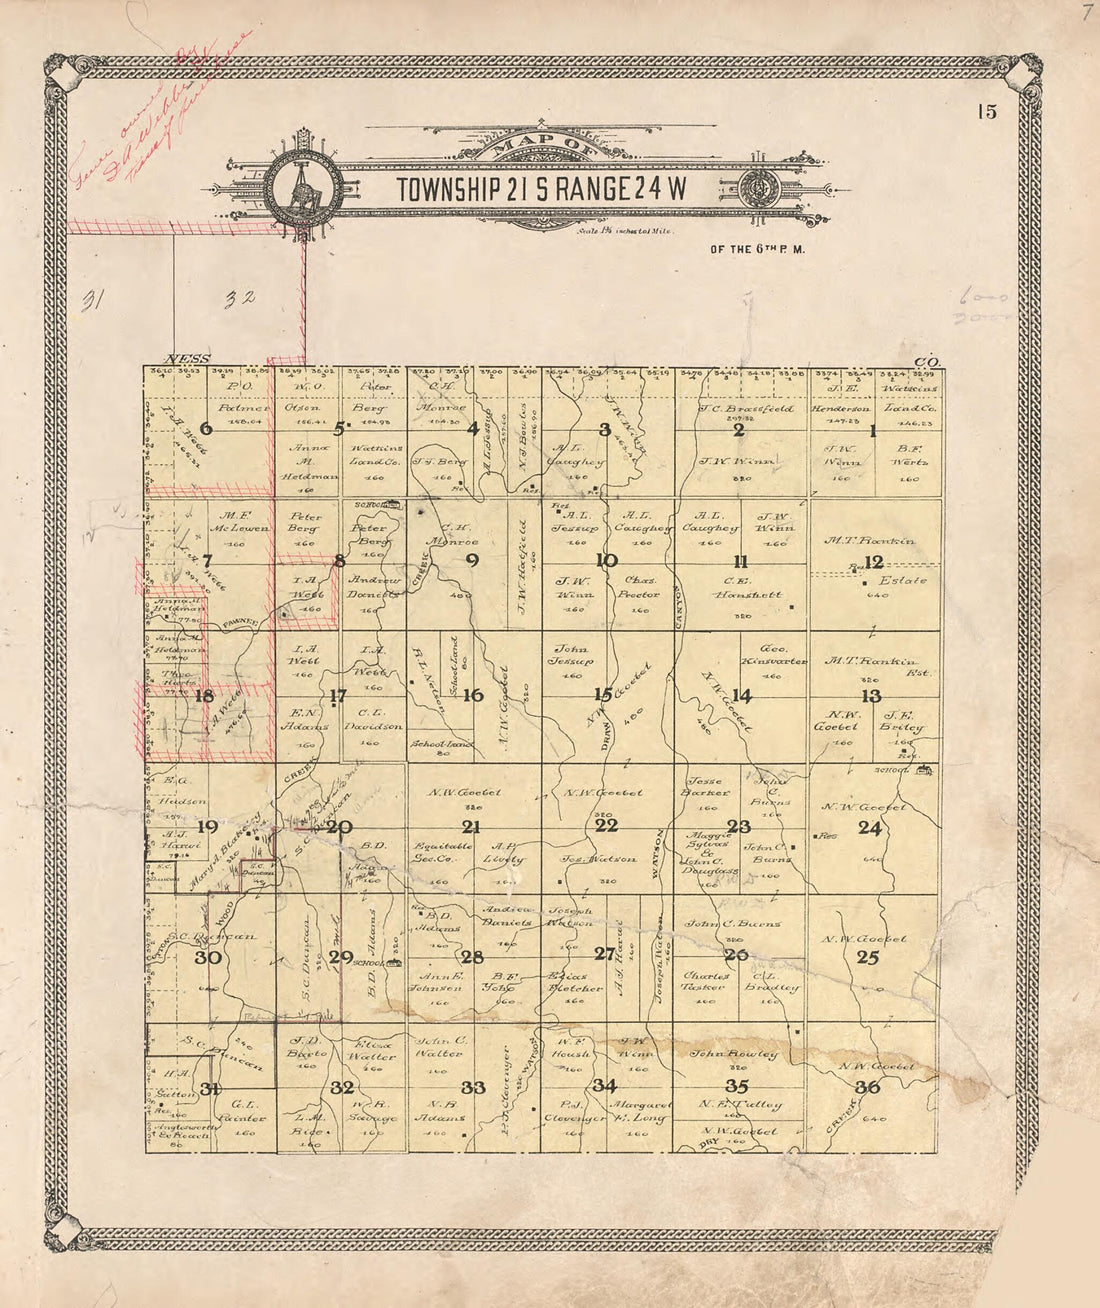 This old map of Map of Township 21 S Range 24 W from Standard Atlas of Hodgeman County, Kansas from 1907 was created by  Geo. A. Ogle &amp; Co in 1907